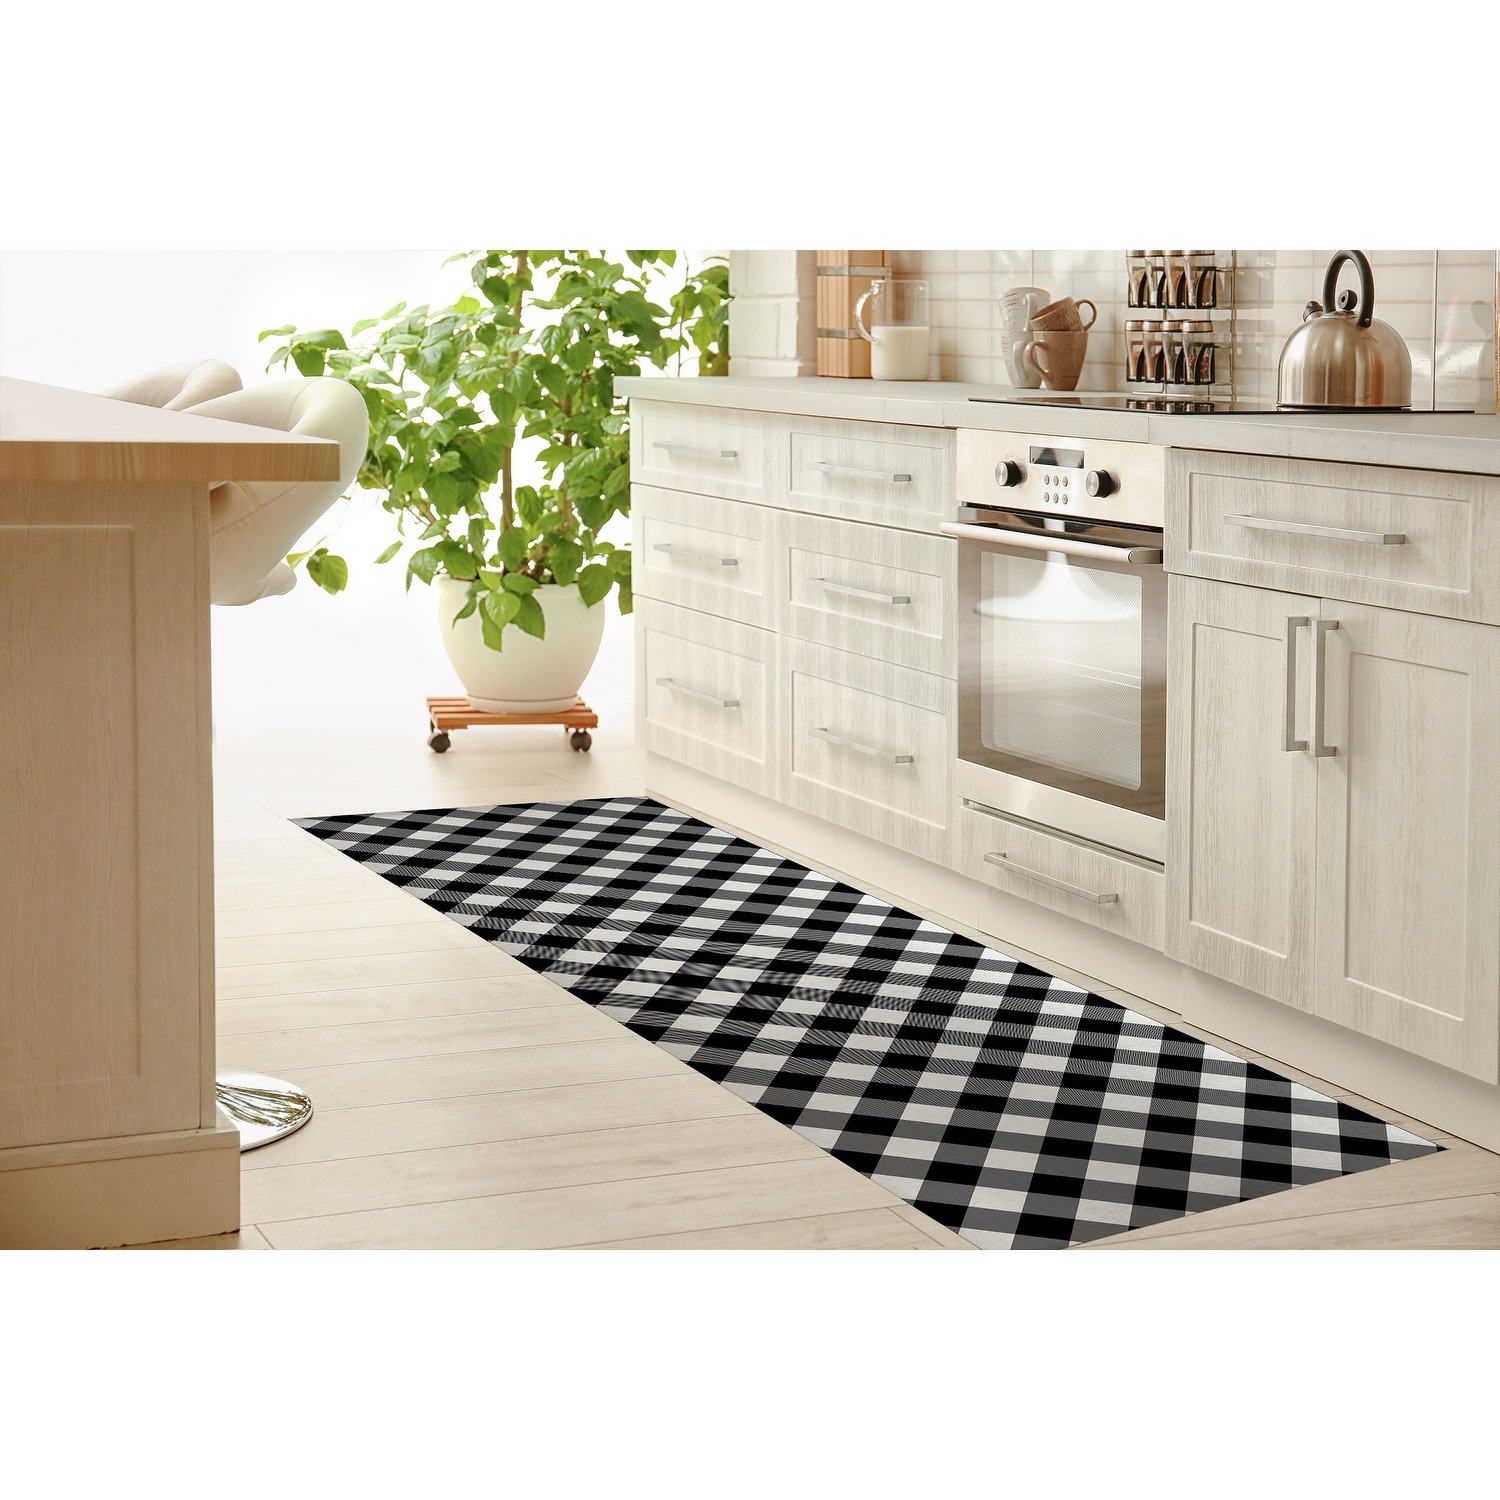 https://ak1.ostkcdn.com/images/products/is/images/direct/d87bec25ccf617e582402a0215ee4f8a483f1420/DIAGONAL-BUFFALO-PLAID-BLACK-%26-WHITE-Kitchen-Mat-by-Kavka-Designs.jpg